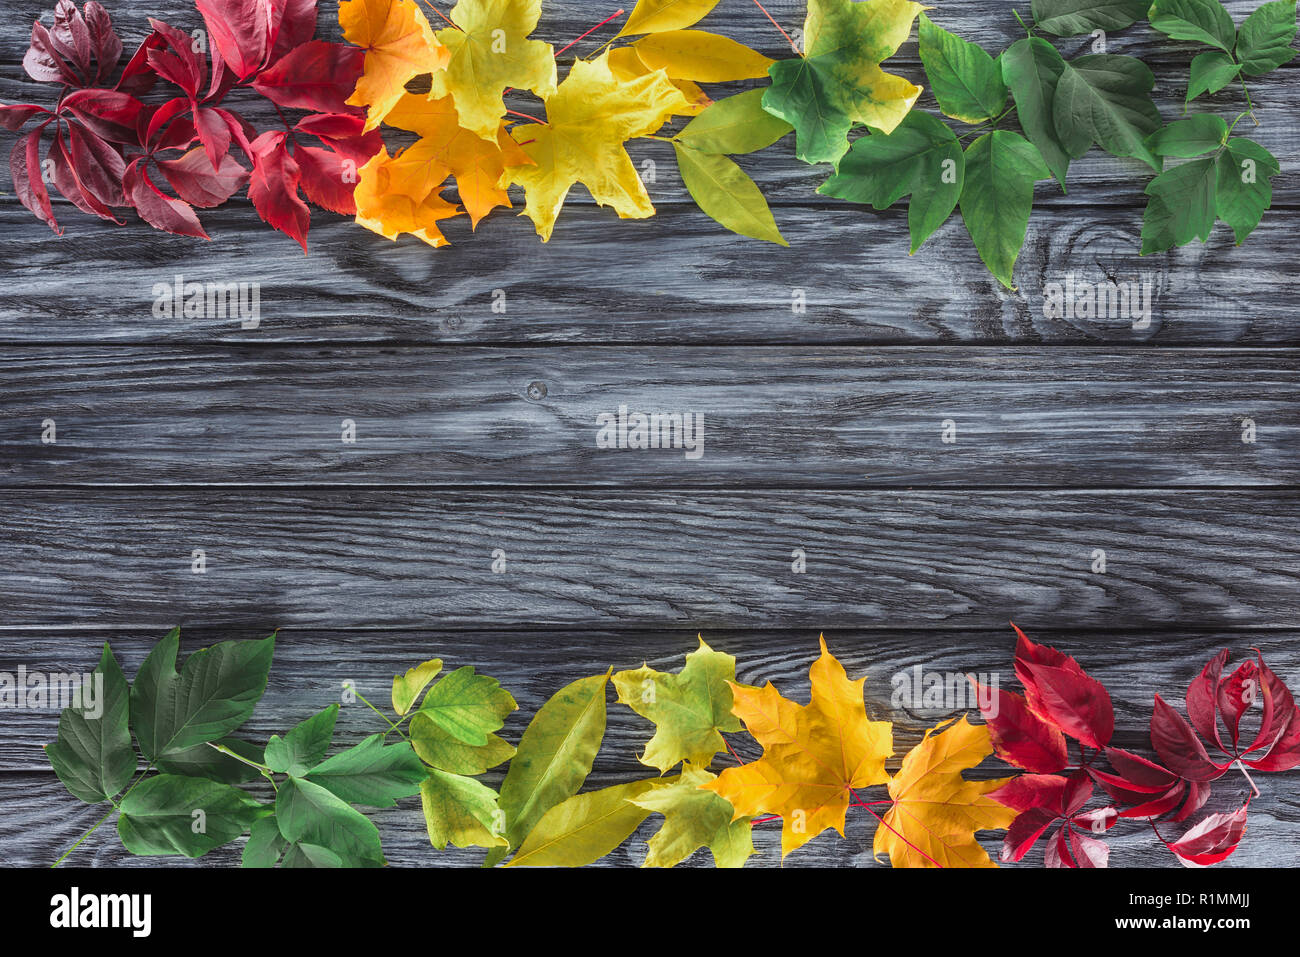 top view of burgundy, yellow and green autumnal maple leaves on wooden surface Stock Photo